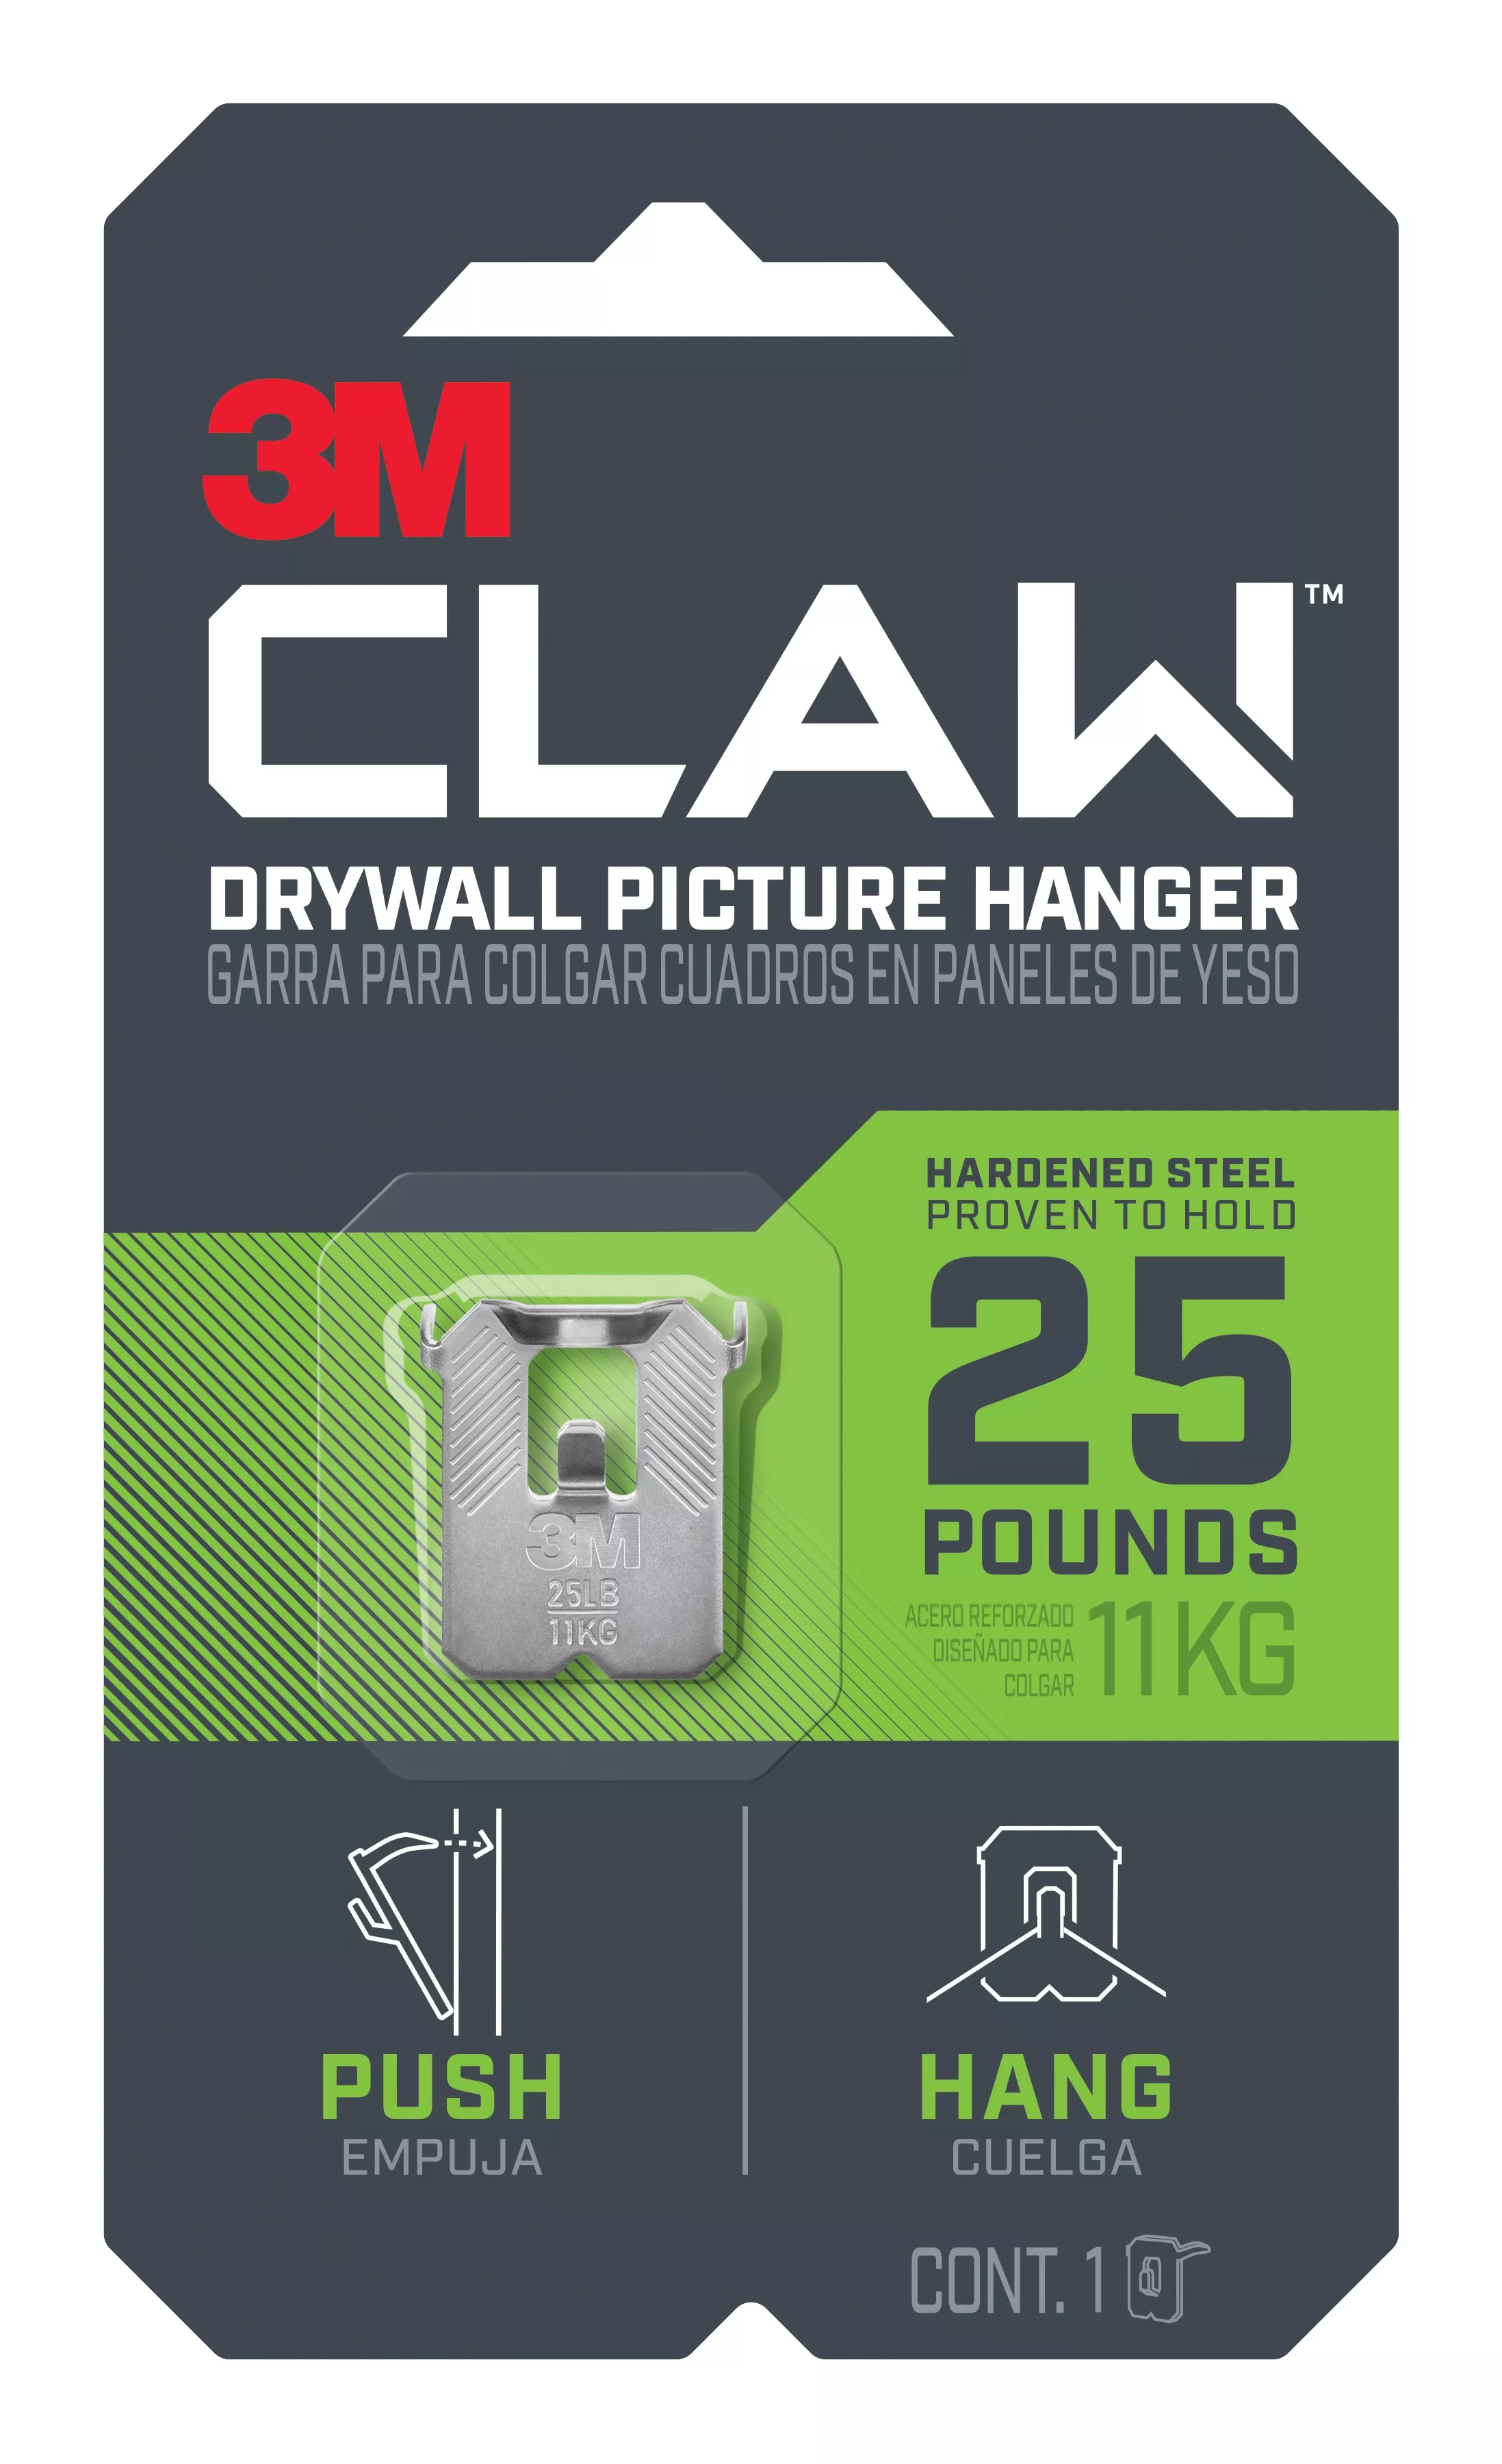 3M CLAW™ Drywall Picture Hanger 25 lb 3PH25-1EF, 1 hanger